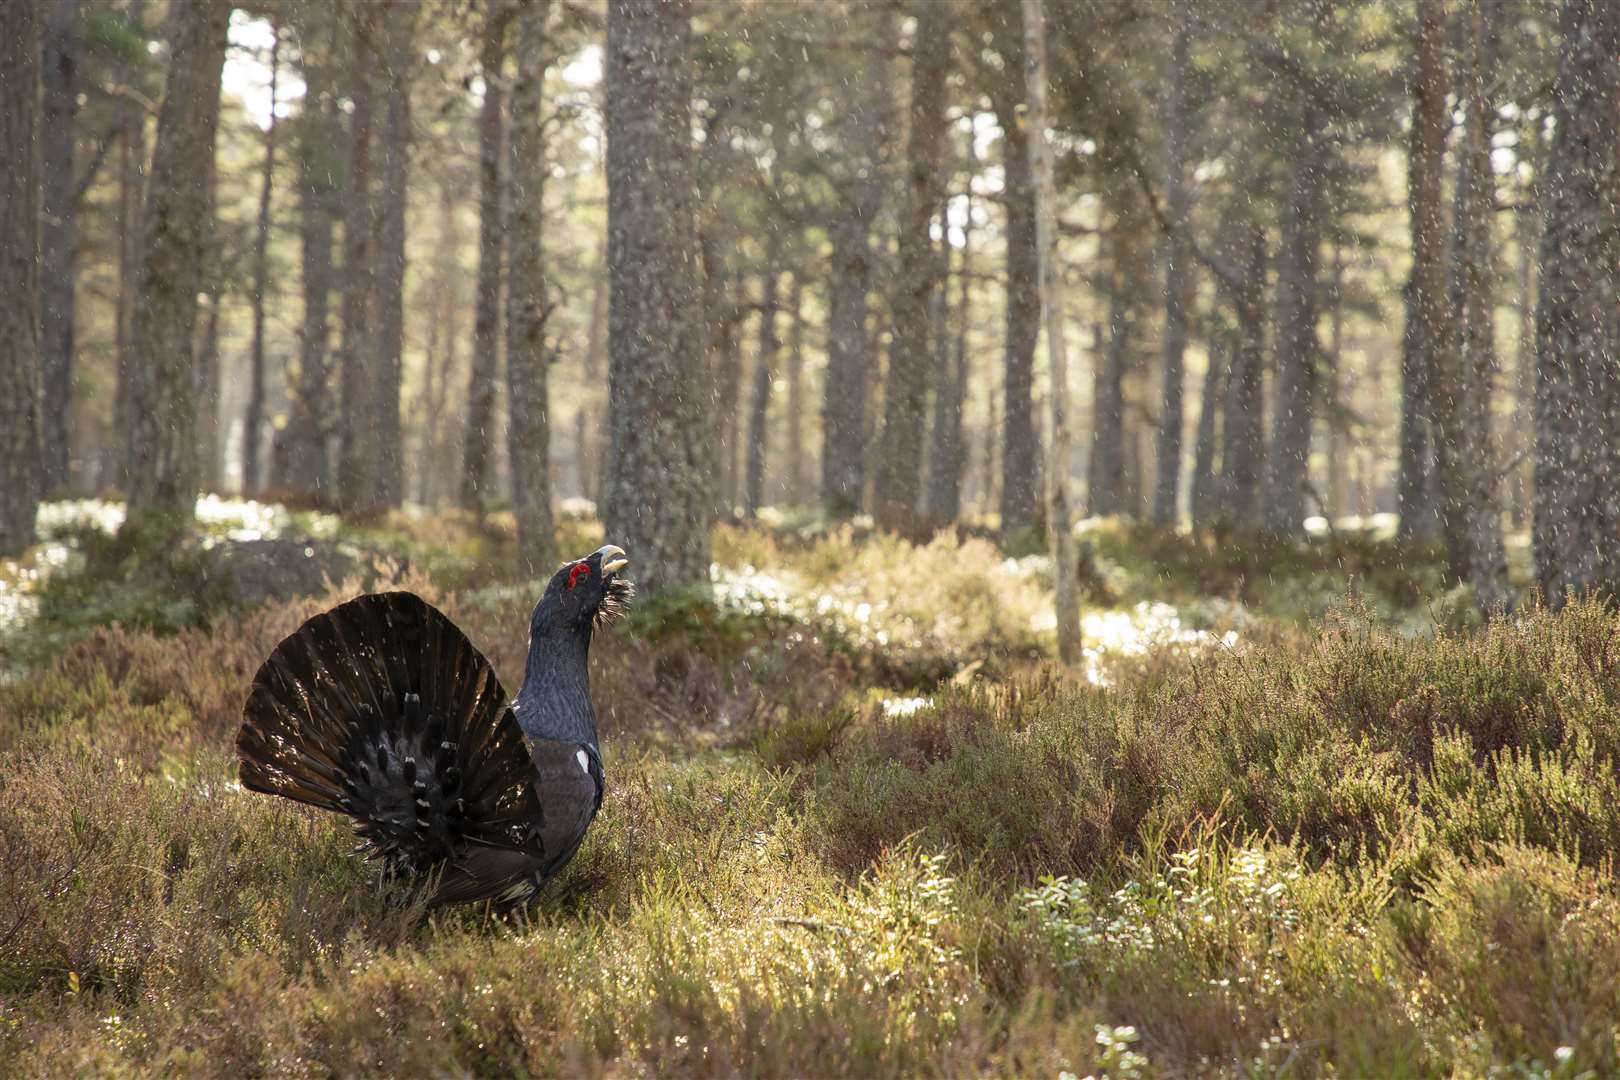 Capercaillie, Tetrao urogallus, male displaying in rain in pine forest, Cairngorms National Park. Photo: Mark Hamblin